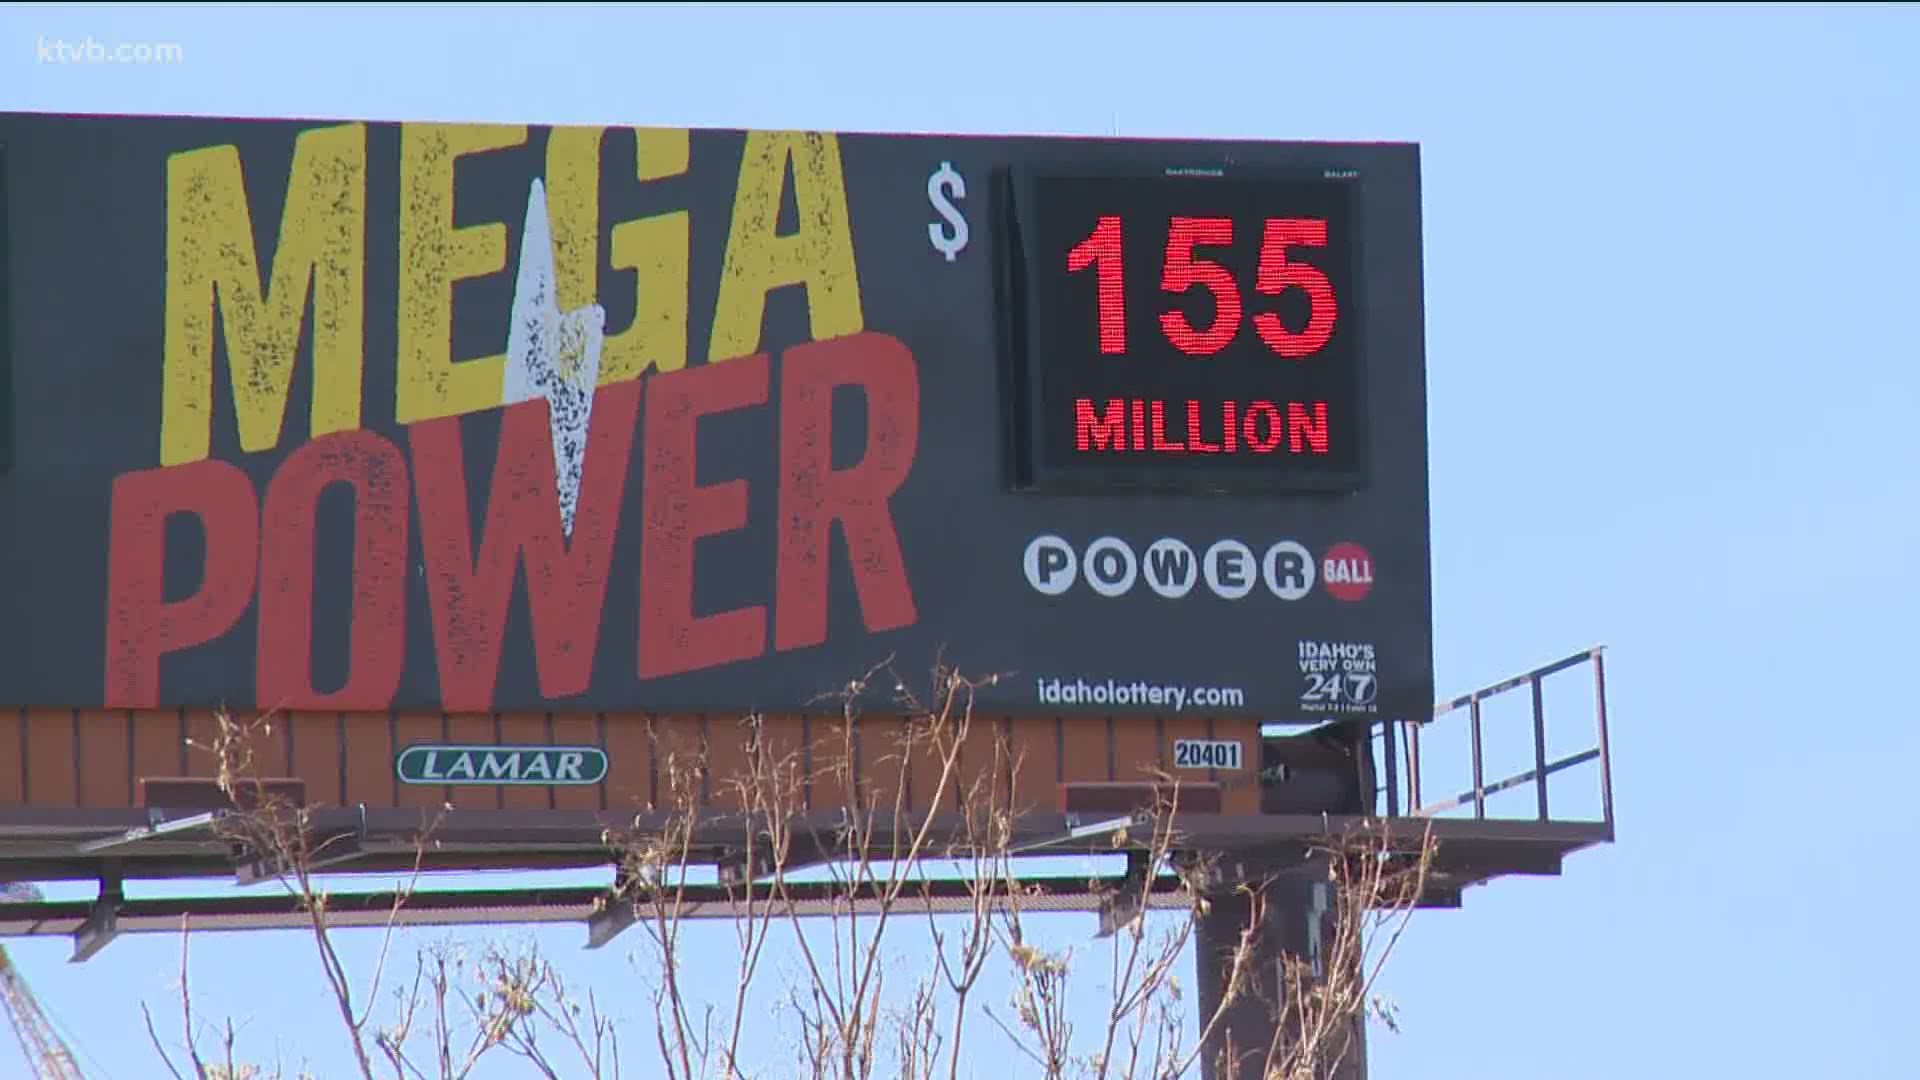 The Idaho Department of Education says the dividend from lottery sales that went to public schools last year was $35 million, and $9 million came from Powerball.